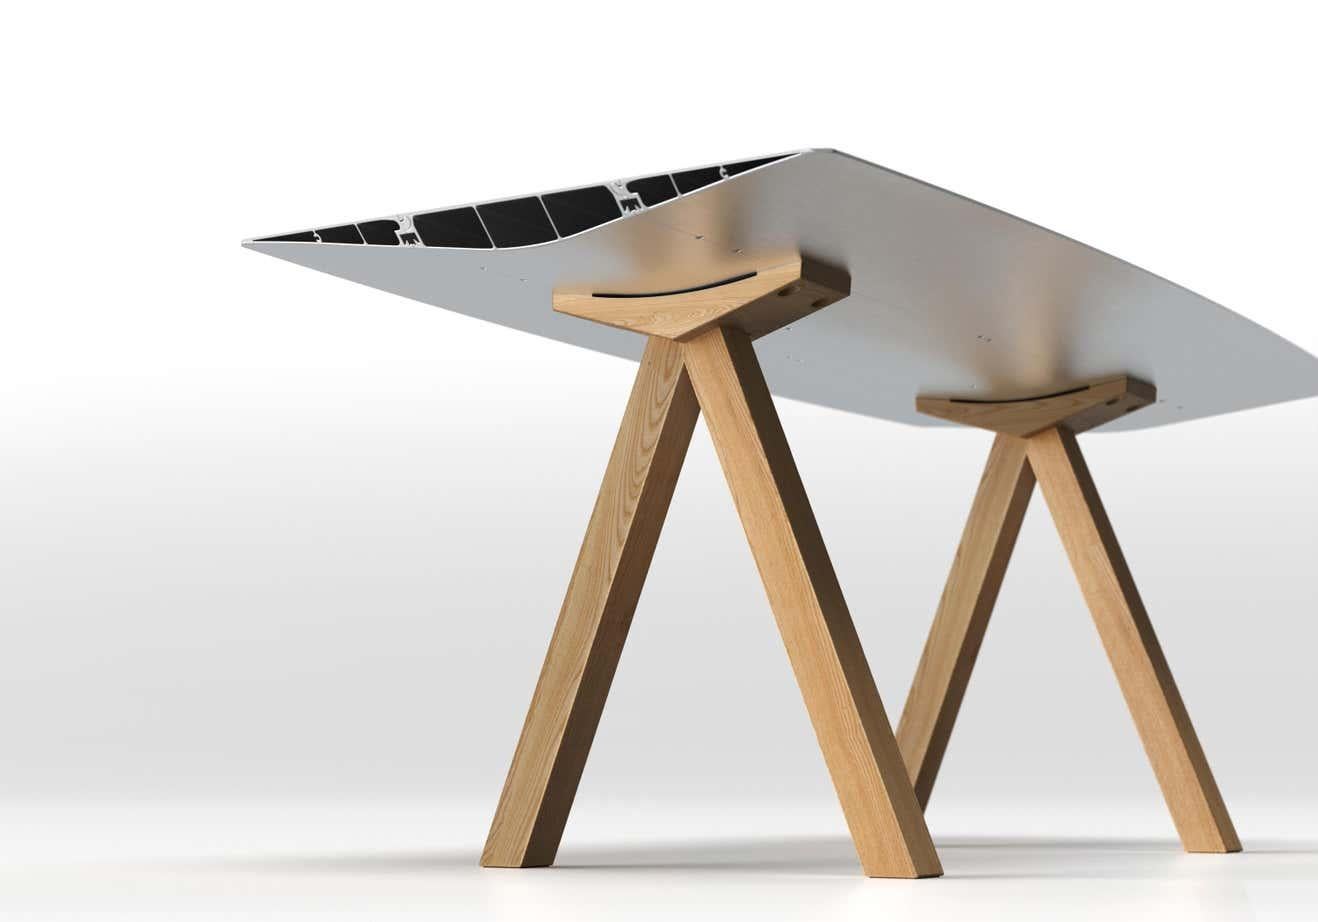 Dinning Table B 90cm x 160cm Aluminum Anodized Silver Top Wooden legs

Materials: 
Aluminium, oak, ash
Dimensions: 
D 90 cm x W 160 cm x H 74 cm

The Table B, which inaugurated the Extrusions Collection in 2009, can reach up to five metres